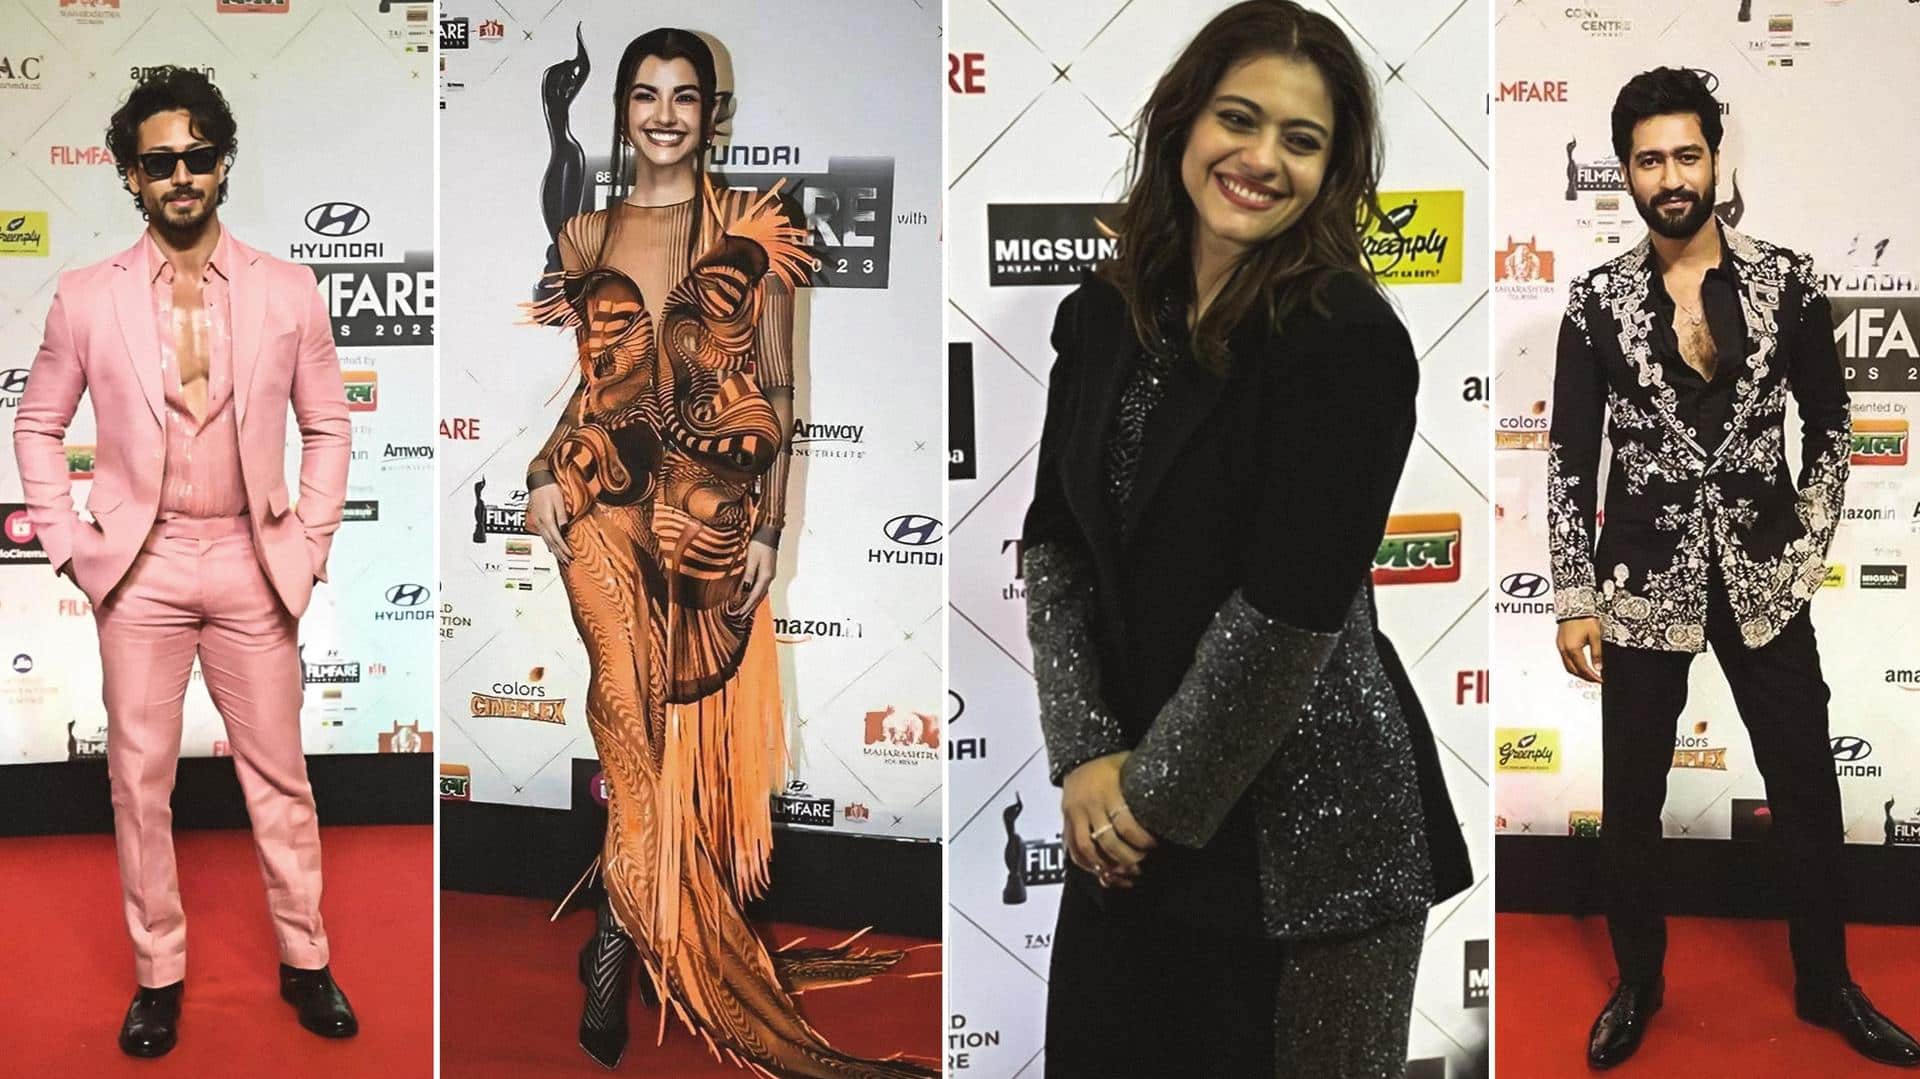 Filmfare Awards 2023 Most notable red carpet looks